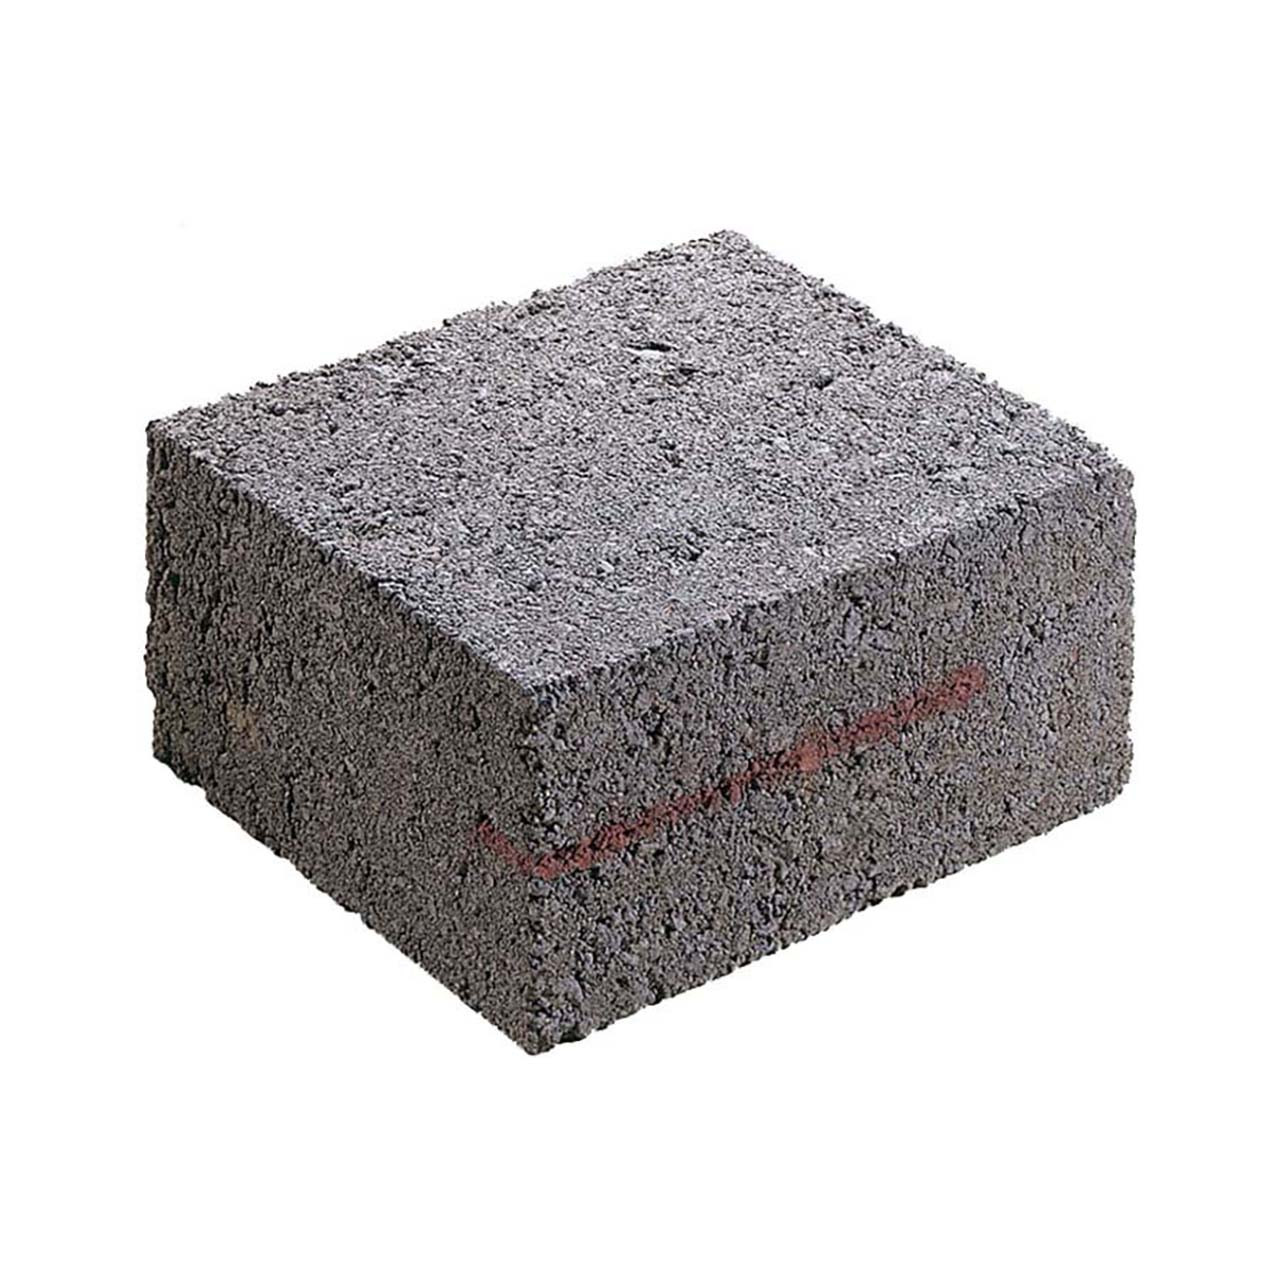 Photograph of 320mm x 280mm x 140mm Foundation Block 7N (Pack of 72)